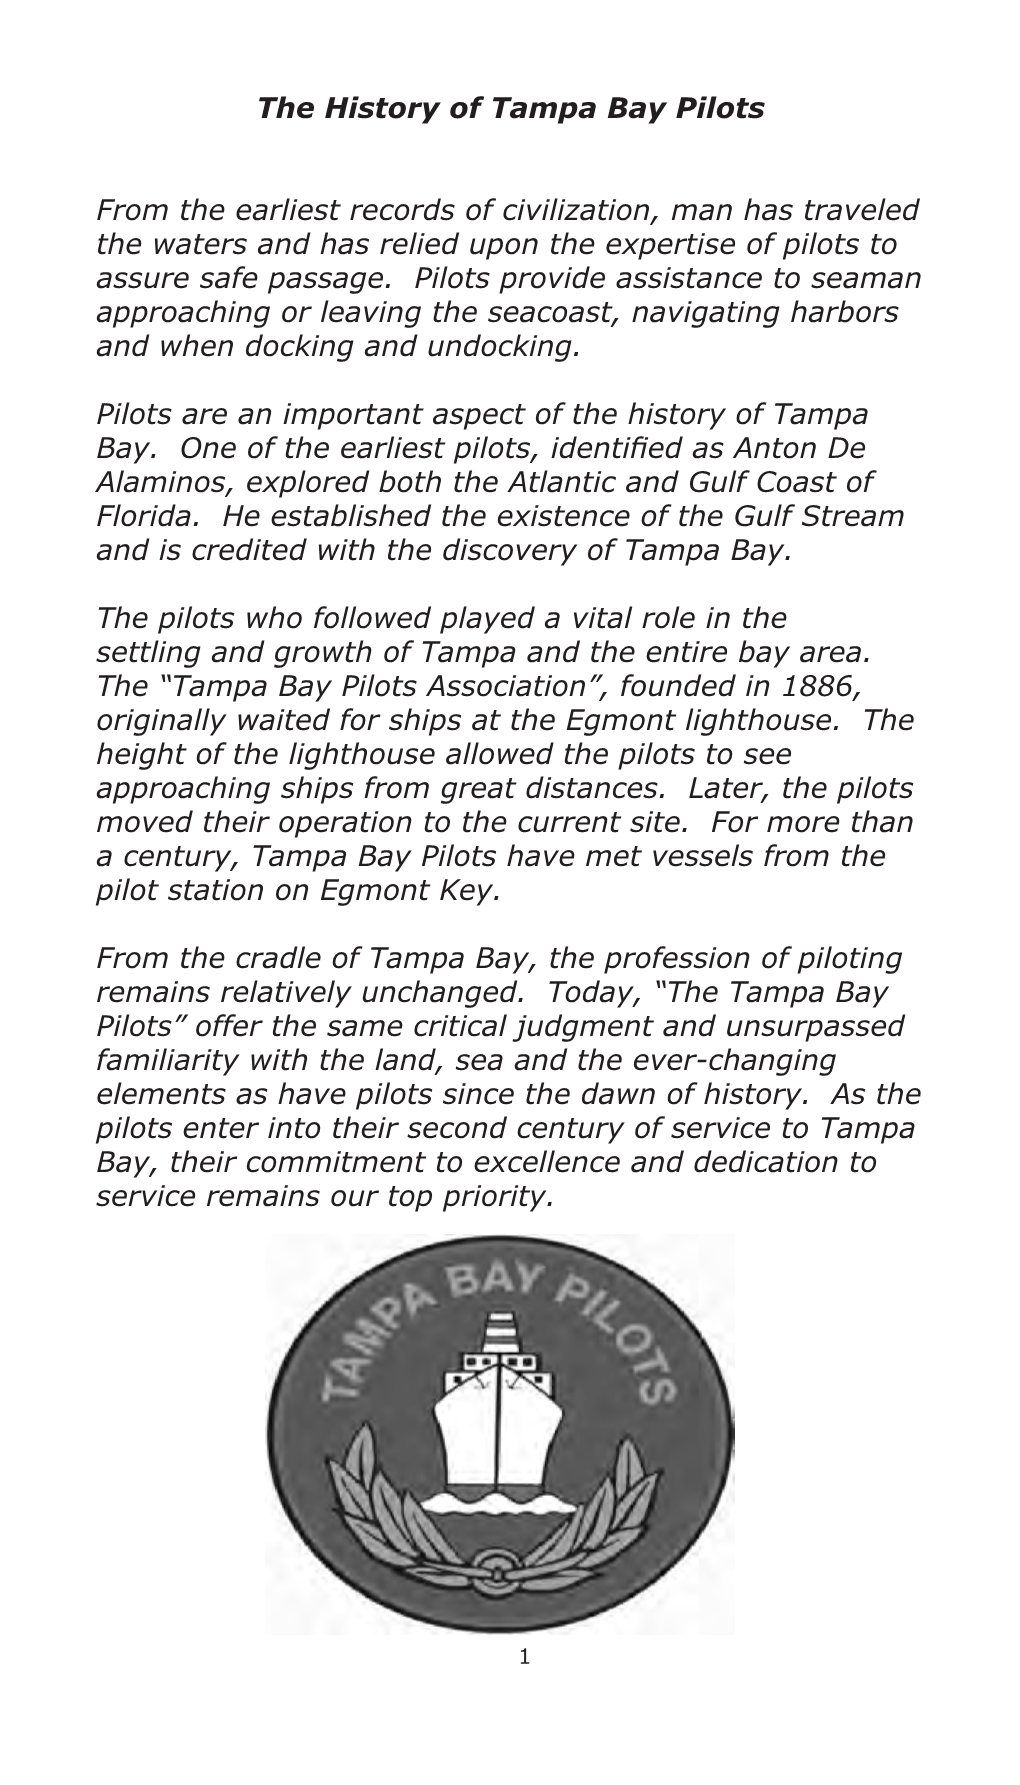 The History of Tampa Bay Pilots from the Earliest Records of Civilization